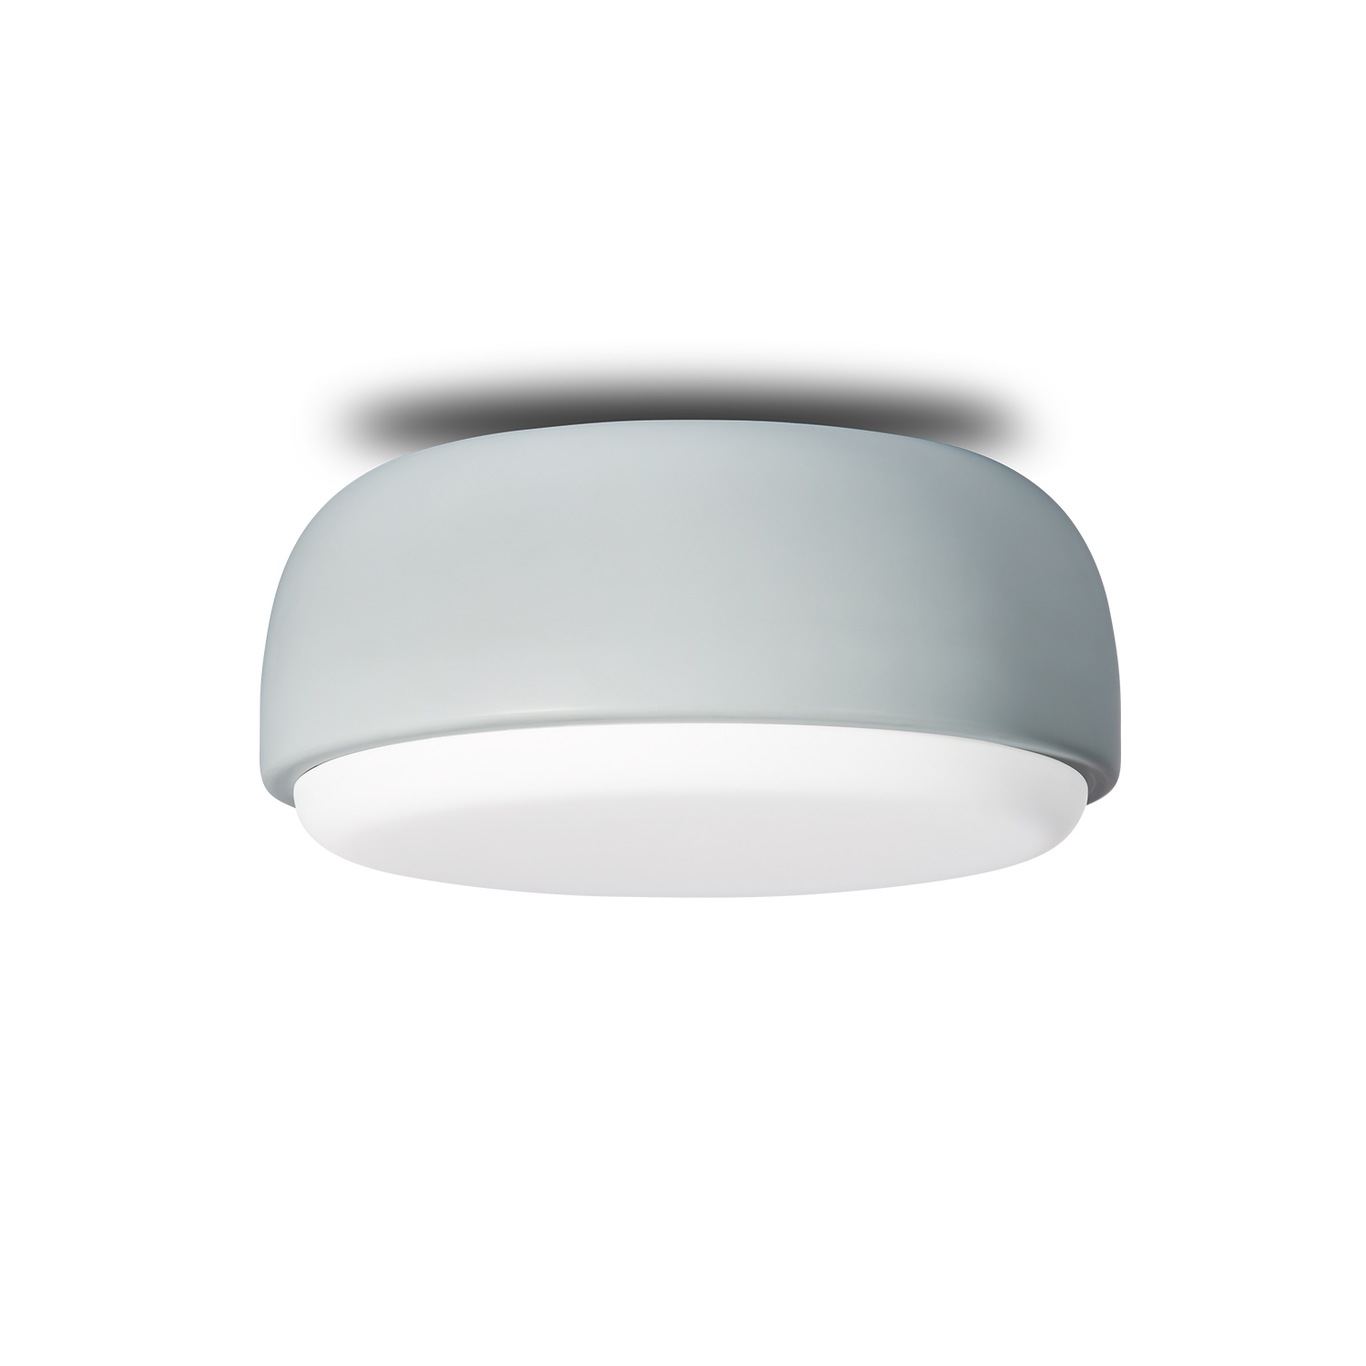 Over Me 30 Ceiling/Wall Lamp, Dusty Blue